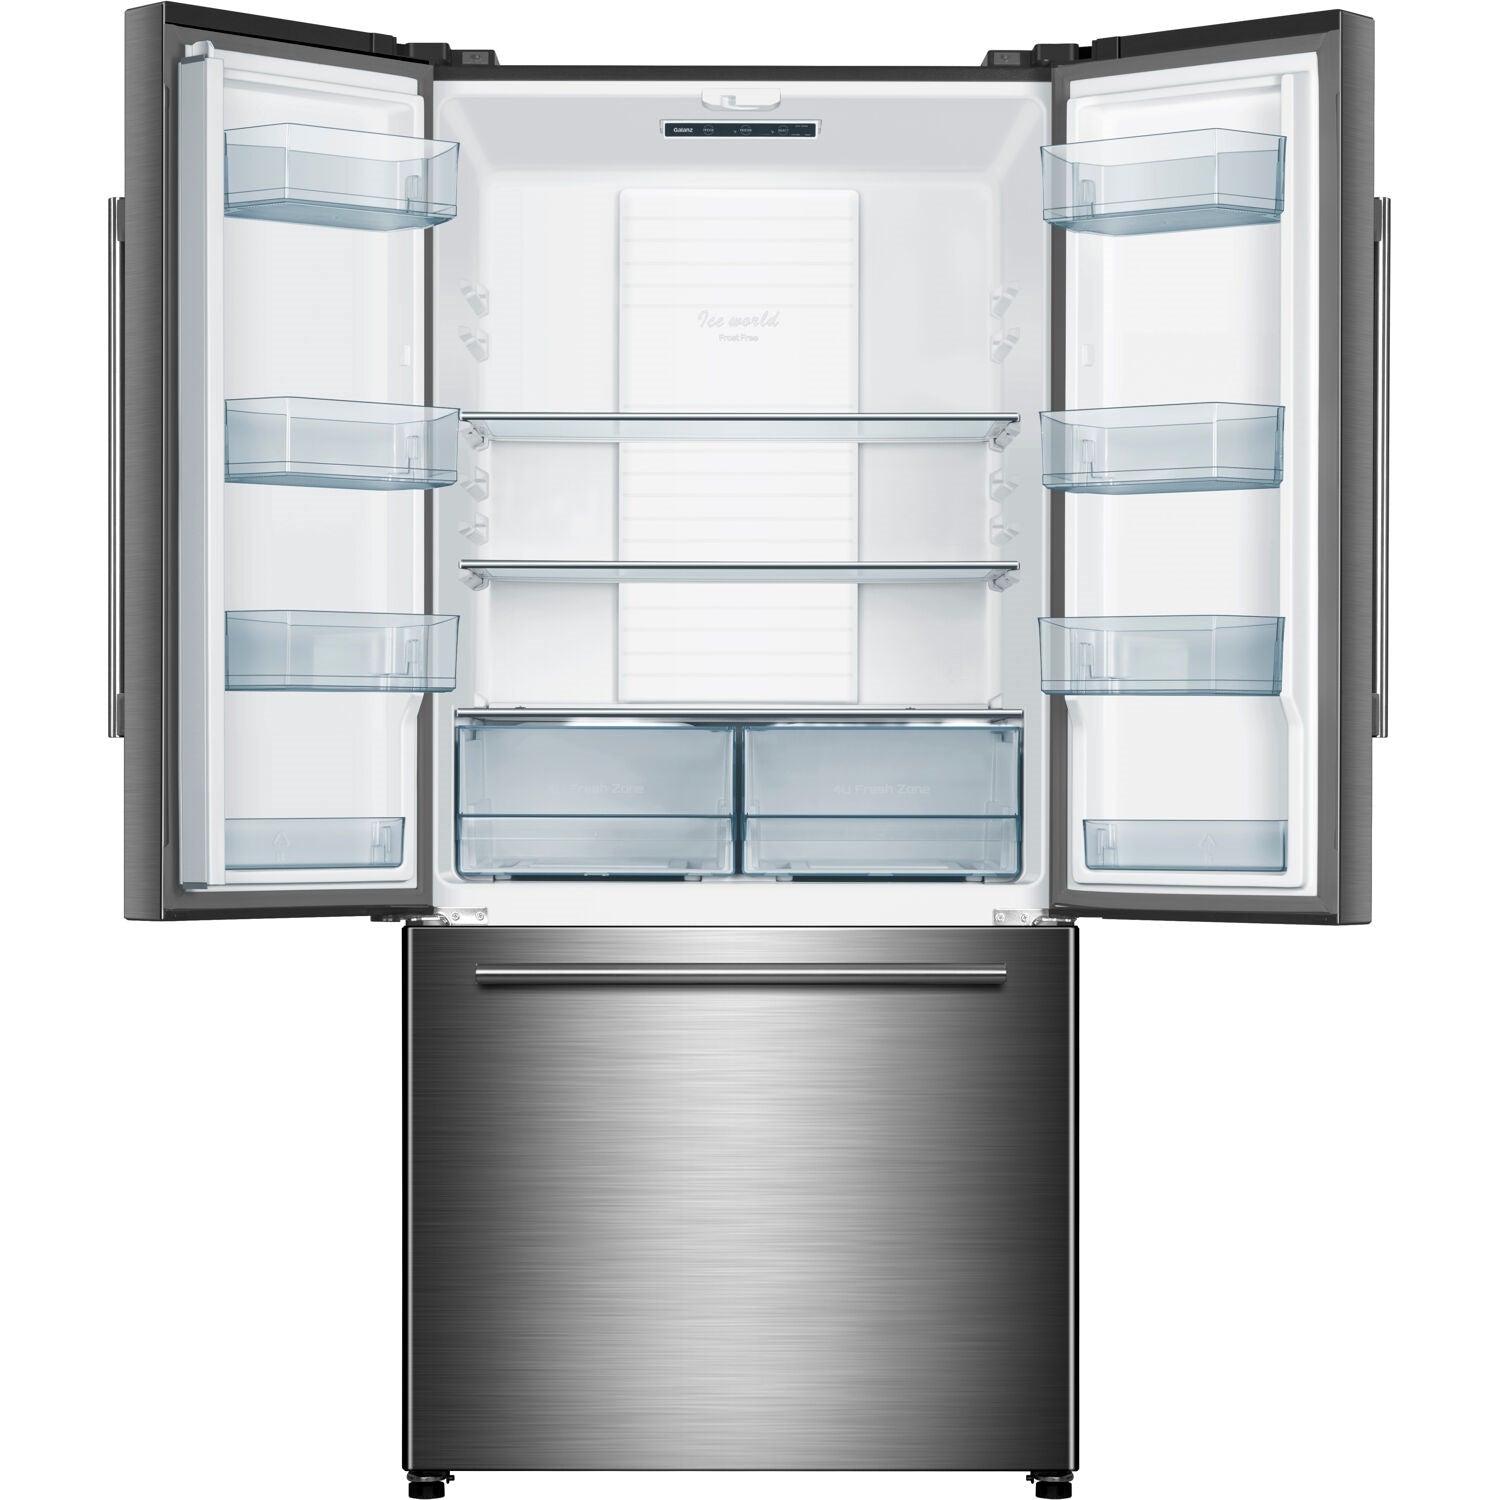 GALANZ - 33 in. W 18 cu. ft. French Door Refrigerator in Fingerprint Resistant Stainless Steel, Counter Depth | GLR18FS5S16